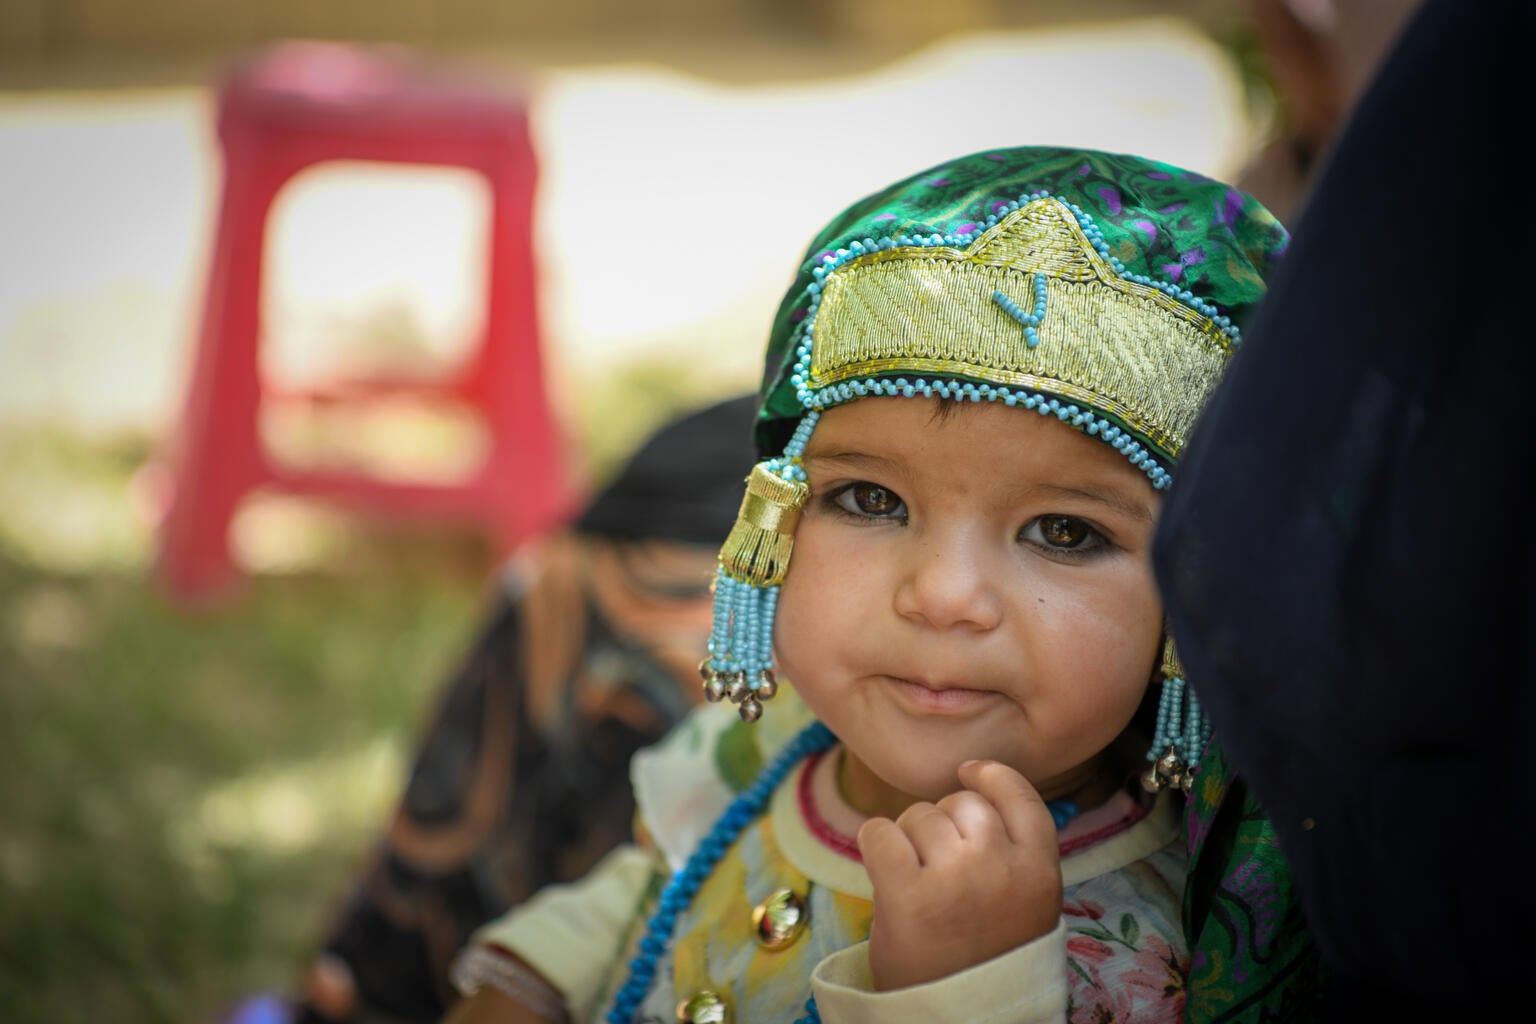 Fatima is suffering from severe wasting, but her mother has brought her for treatment at the UNICEF-supported clinic in Khawja Omari District, Ghazni Province, Afghanistan.